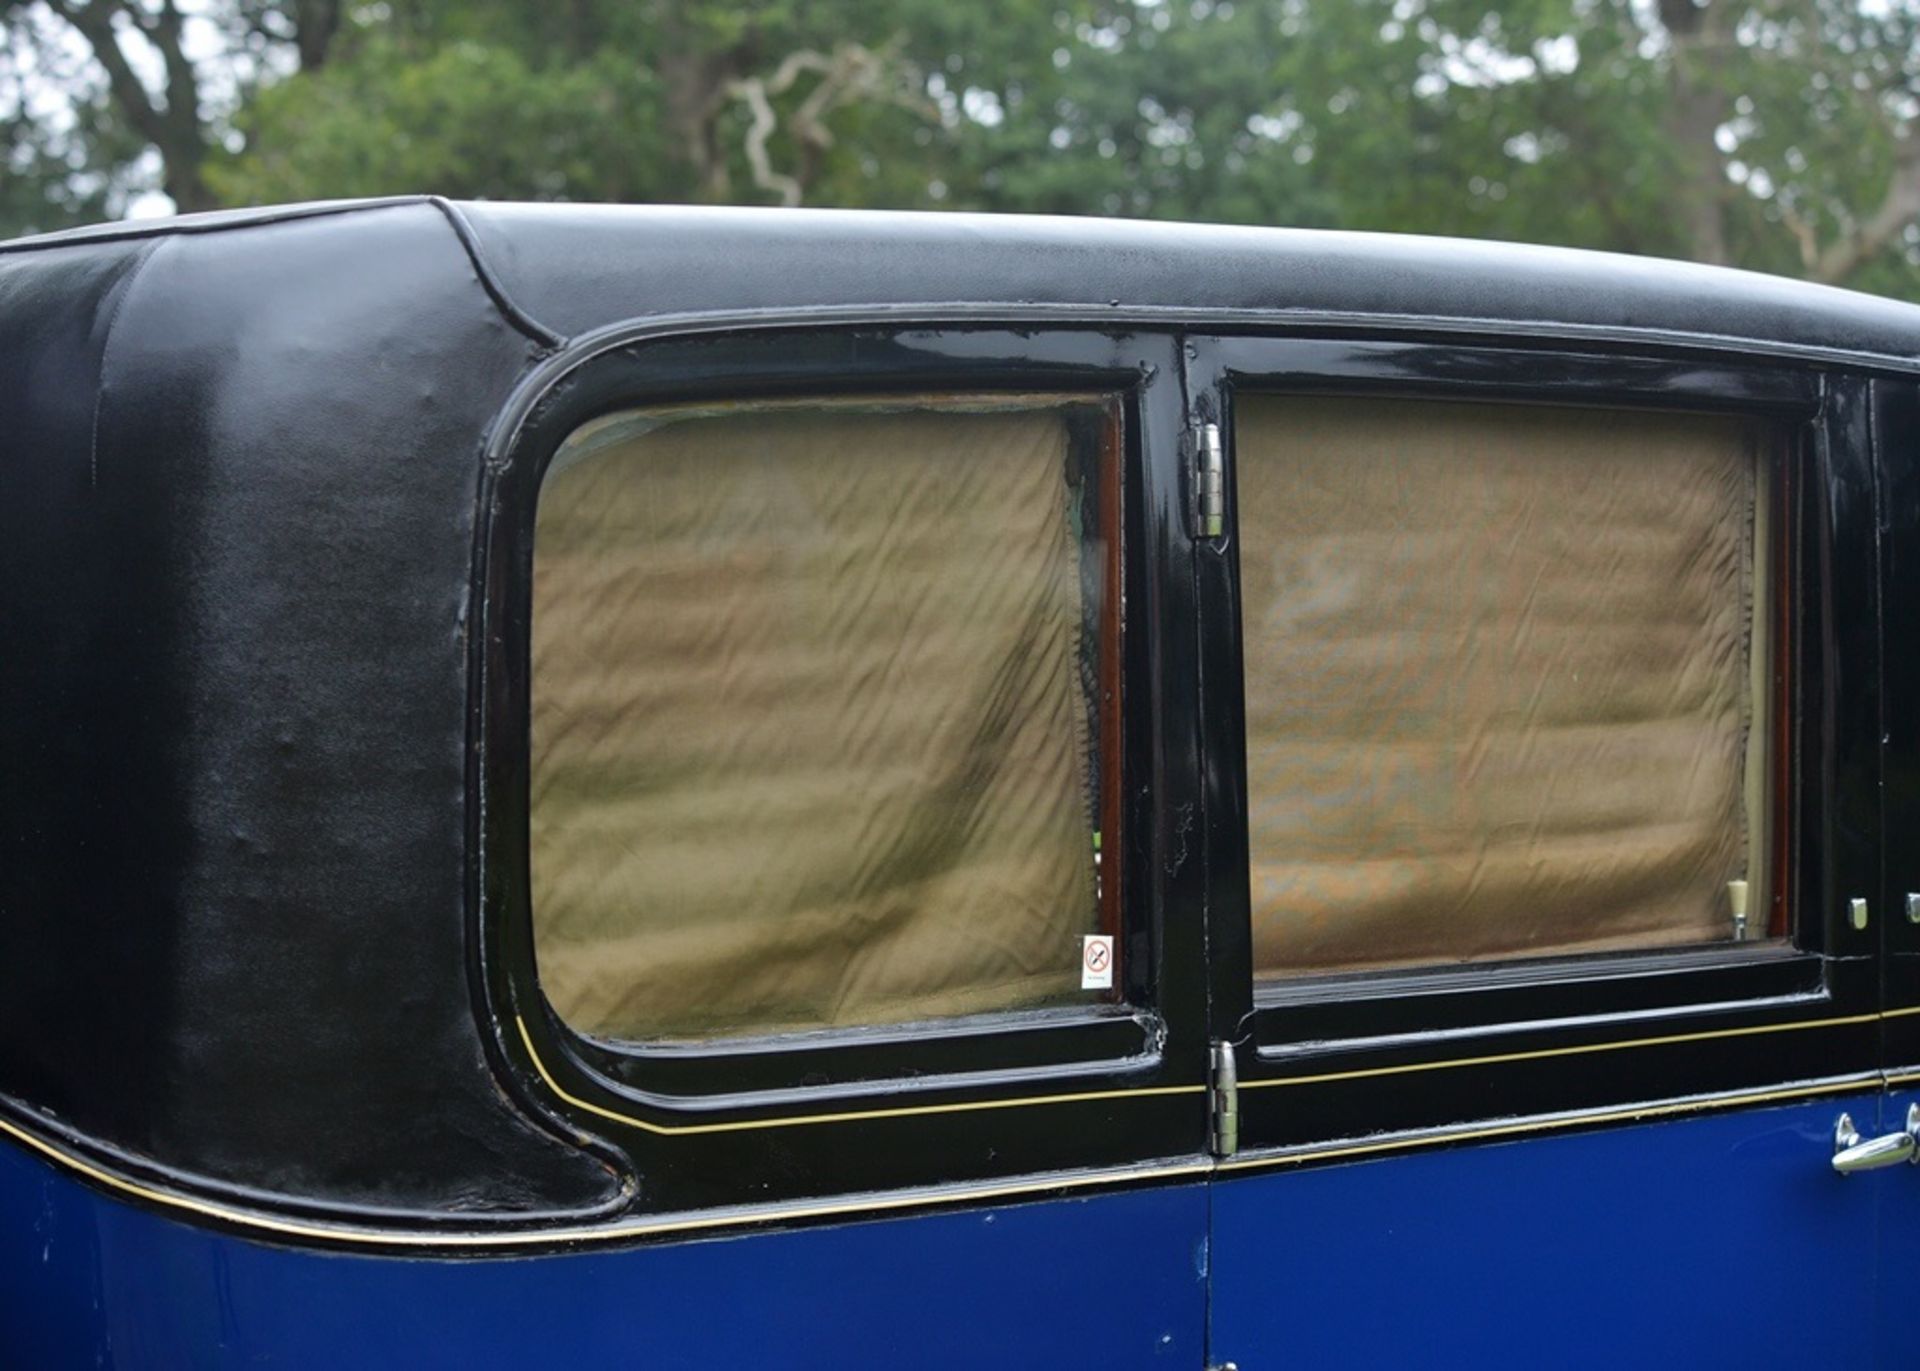 1932 Rolls-Royce 20/25 Limousine by Crosbie & Dunn - Image 13 of 16